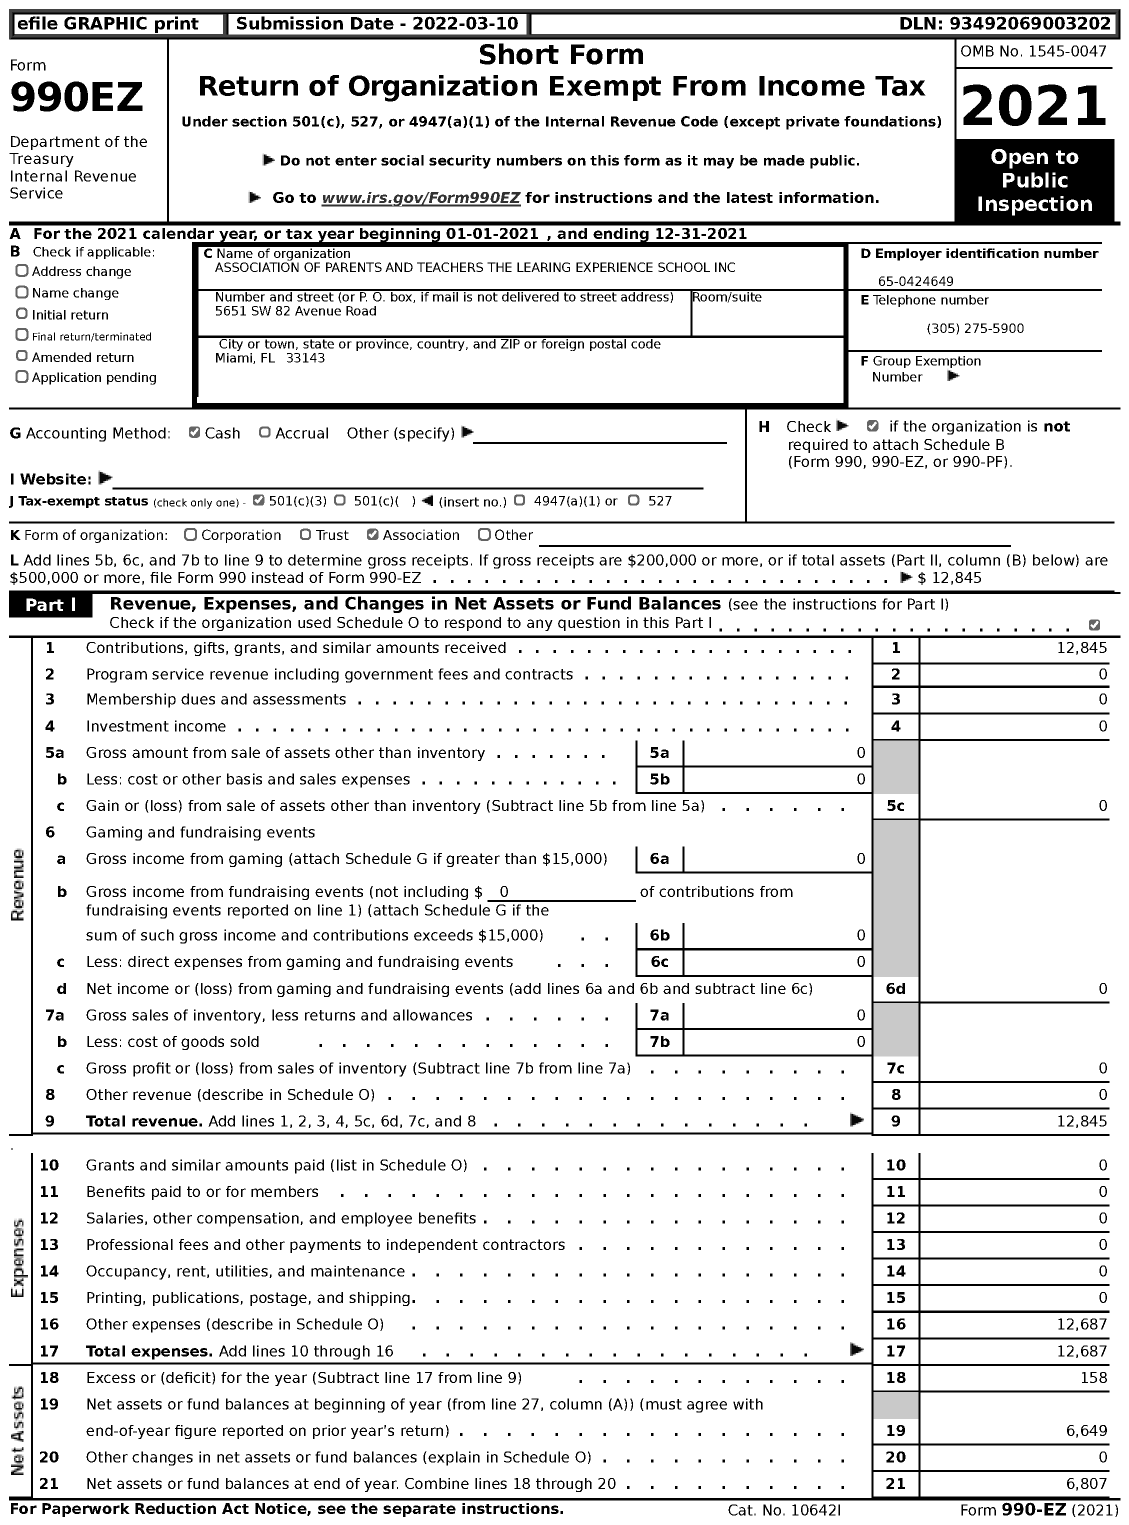 Image of first page of 2021 Form 990EZ for The Association of Parents and Teachers of the Learning Experience School